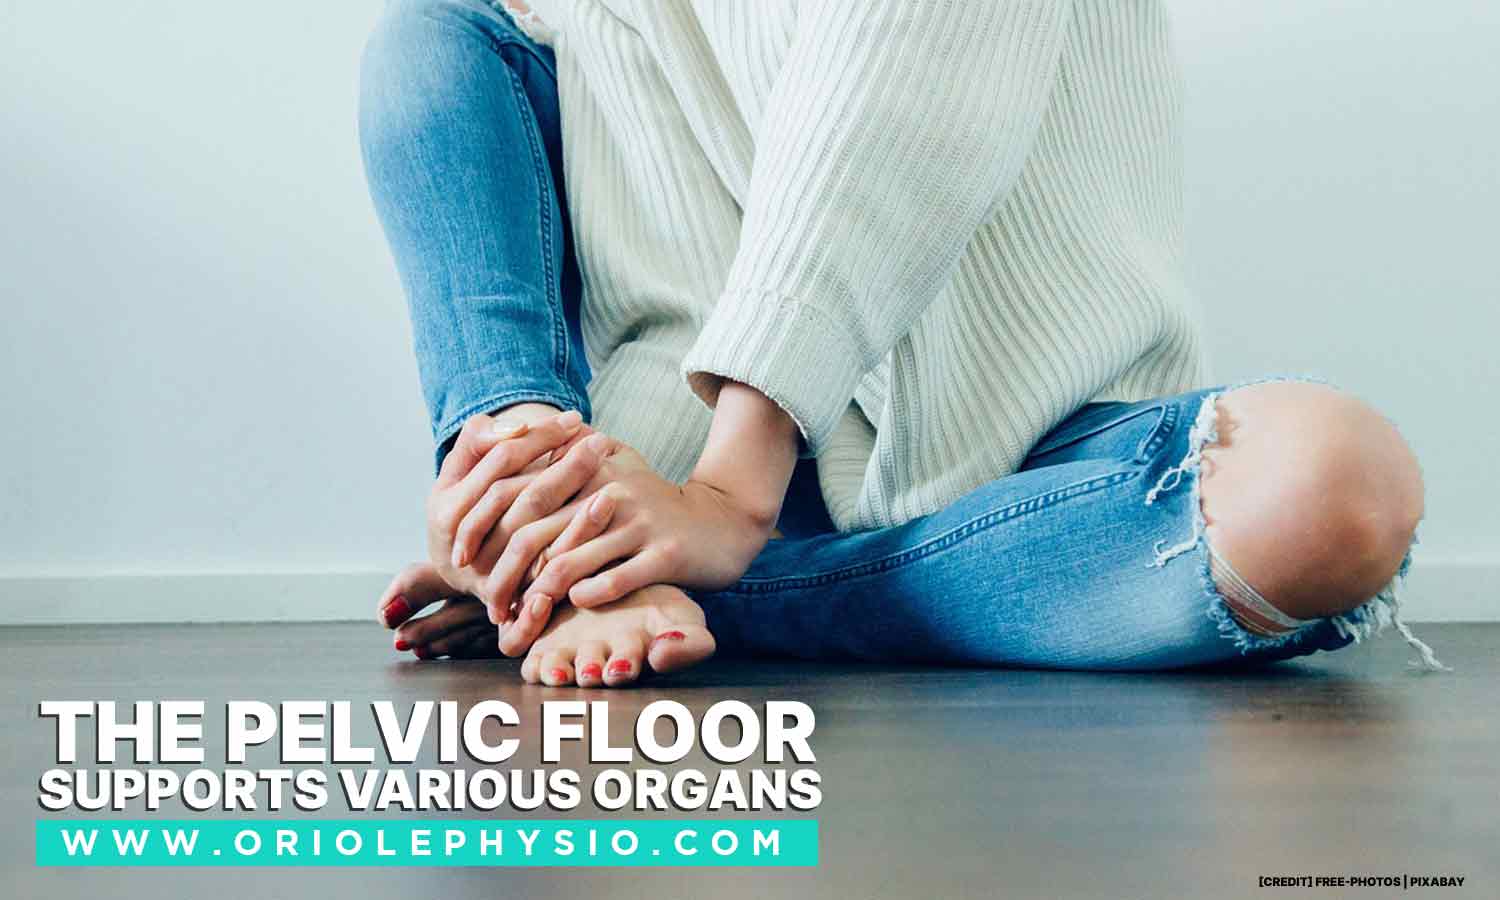 The pelvic floor supports various organs